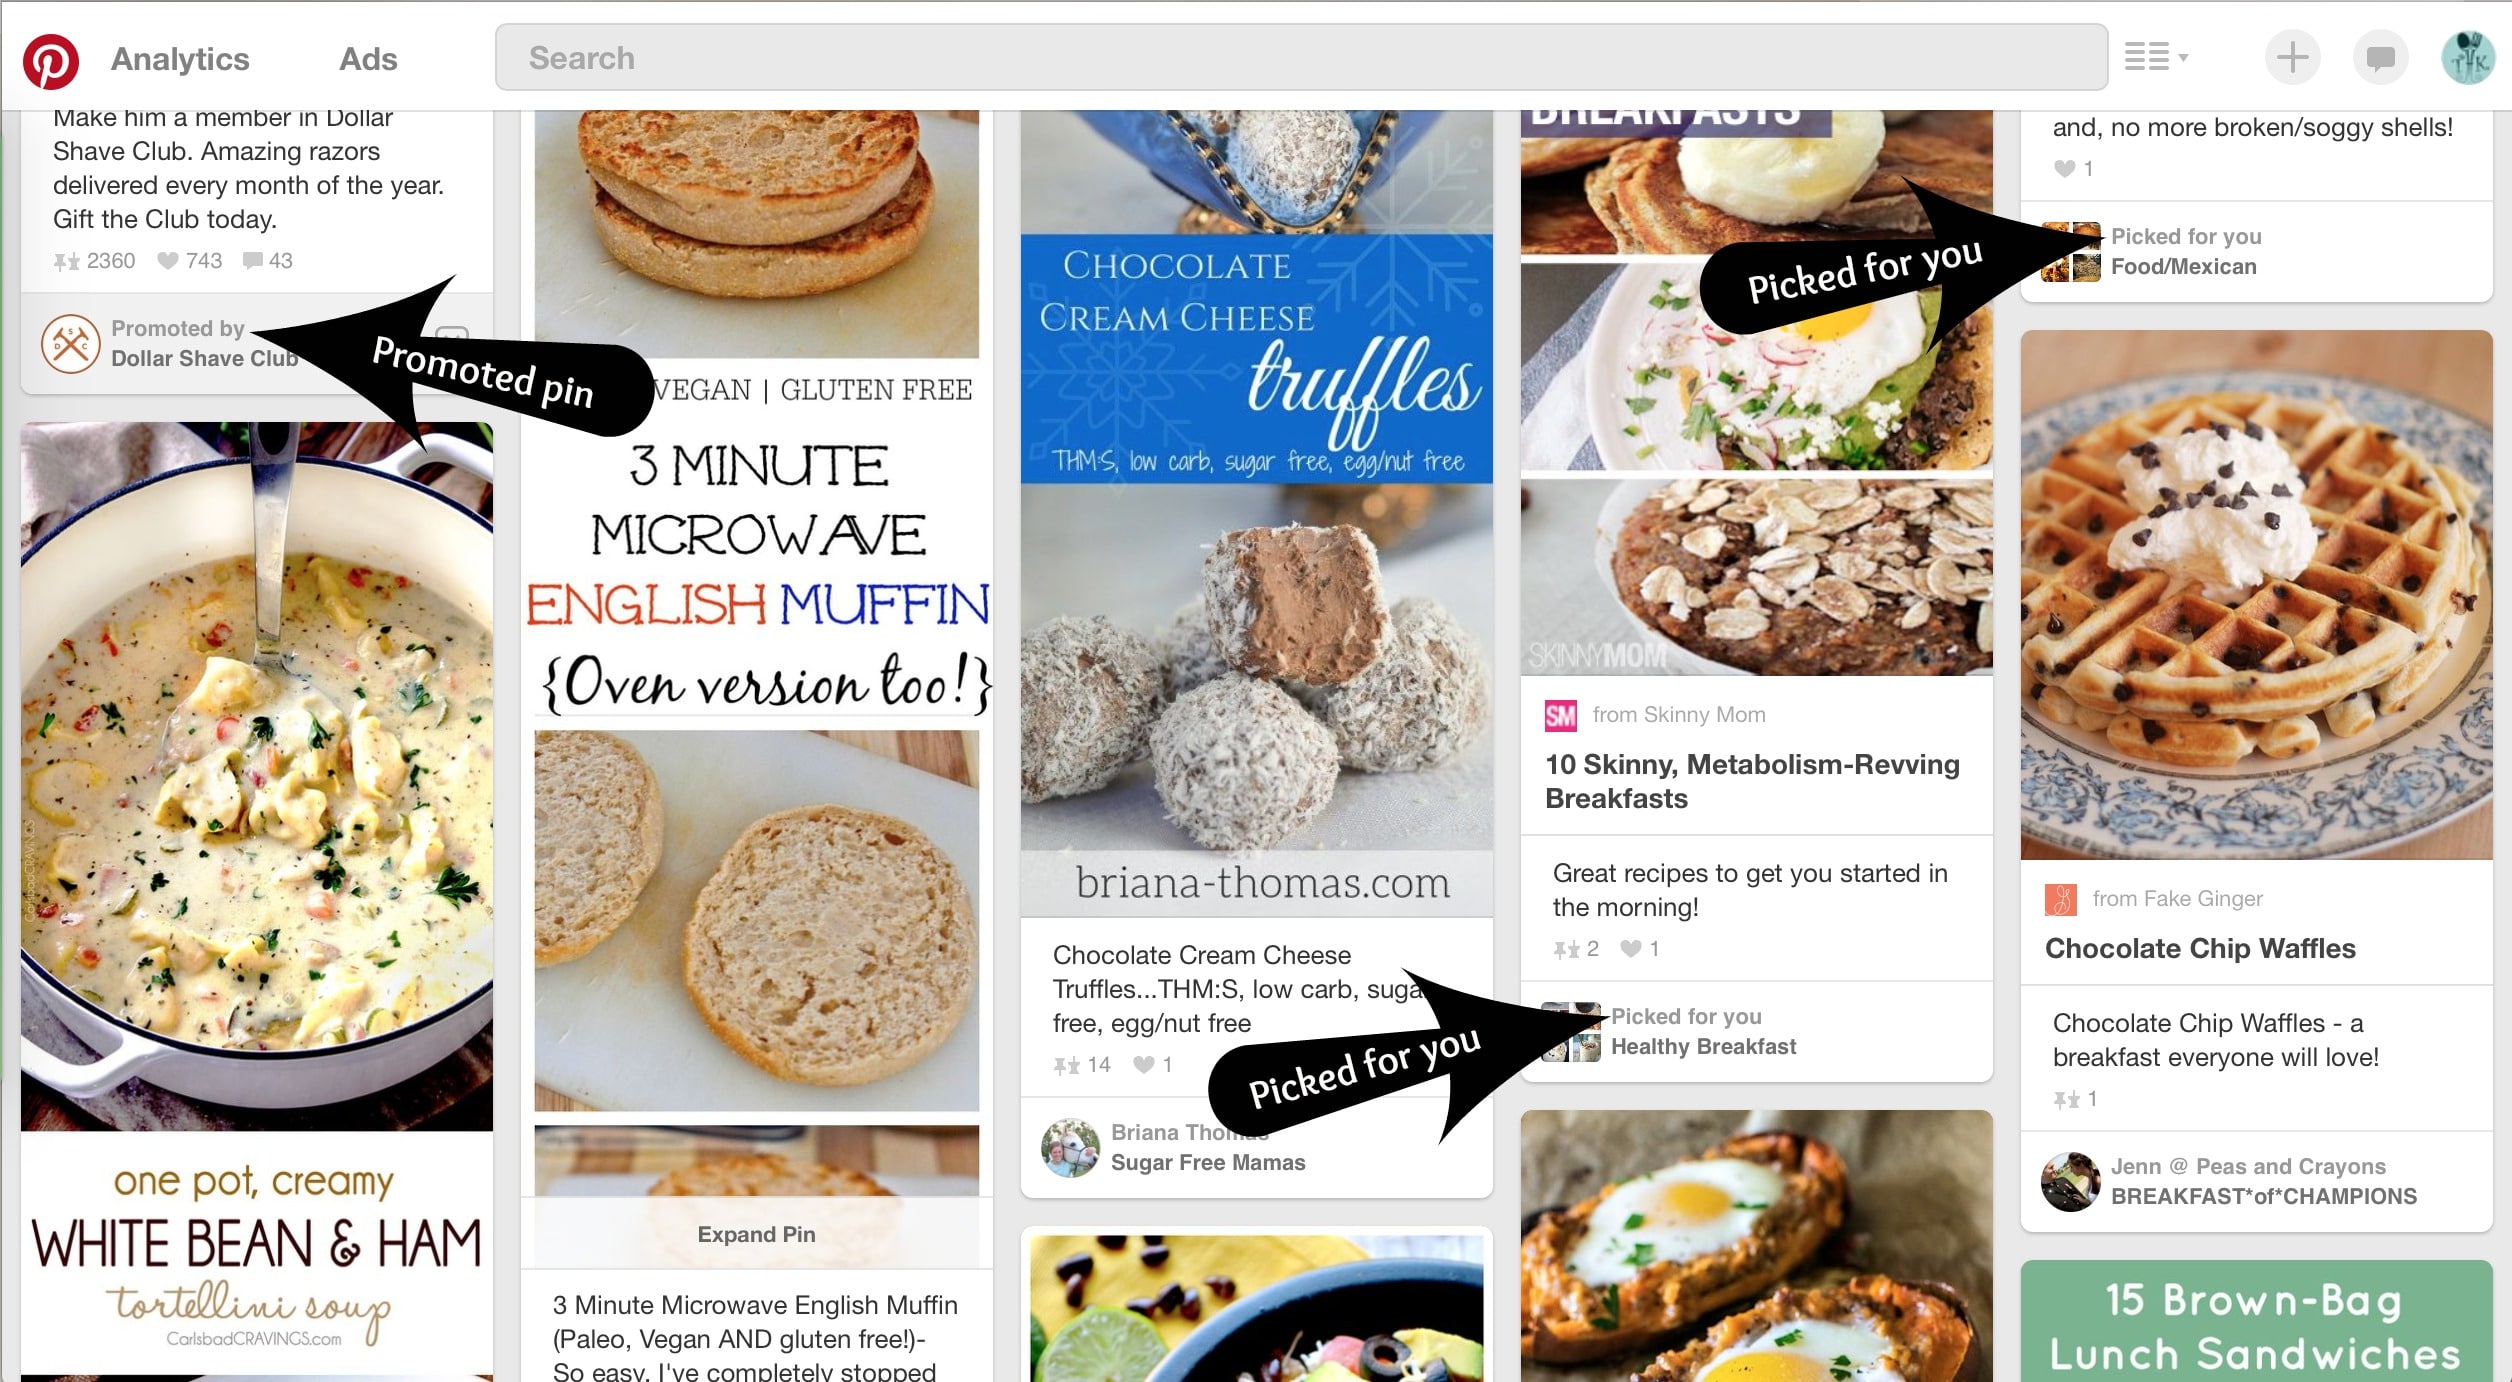 Screen shot of Pinterest feed with arrows showing promoted pin and picked for you pins.